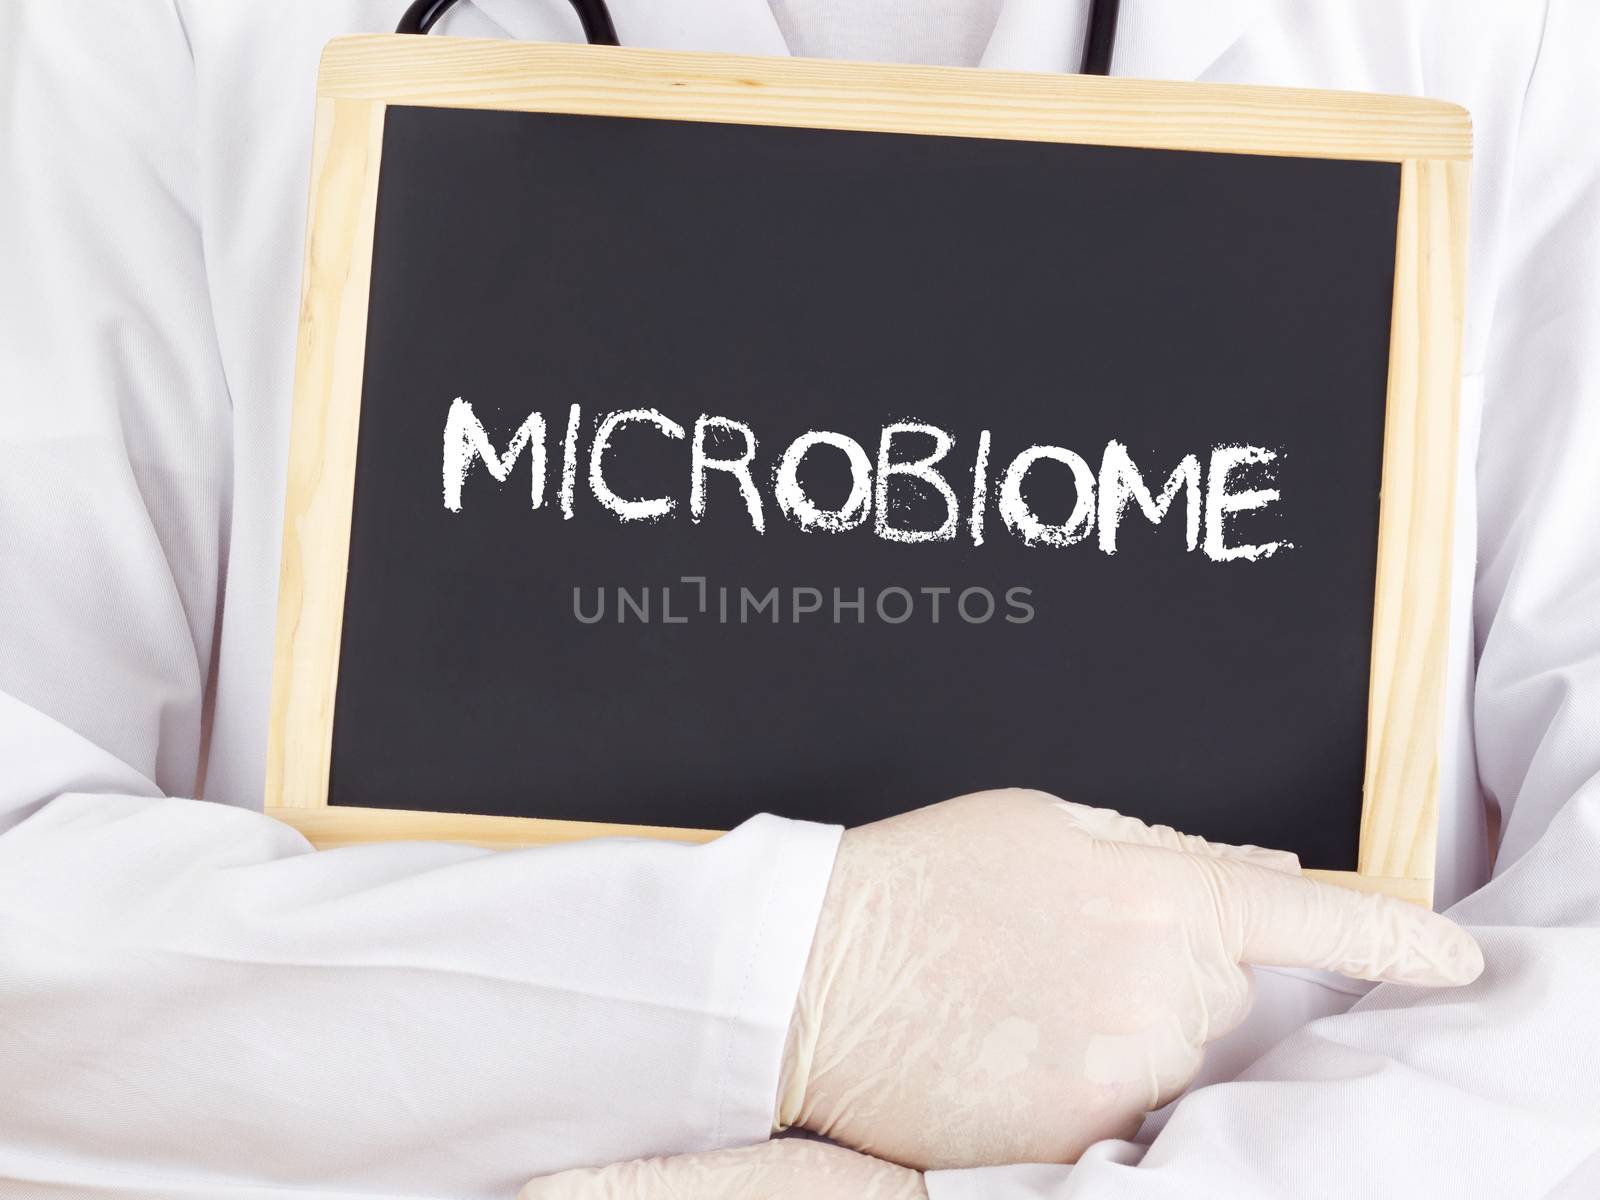 Doctor shows information: microbiome by gwolters